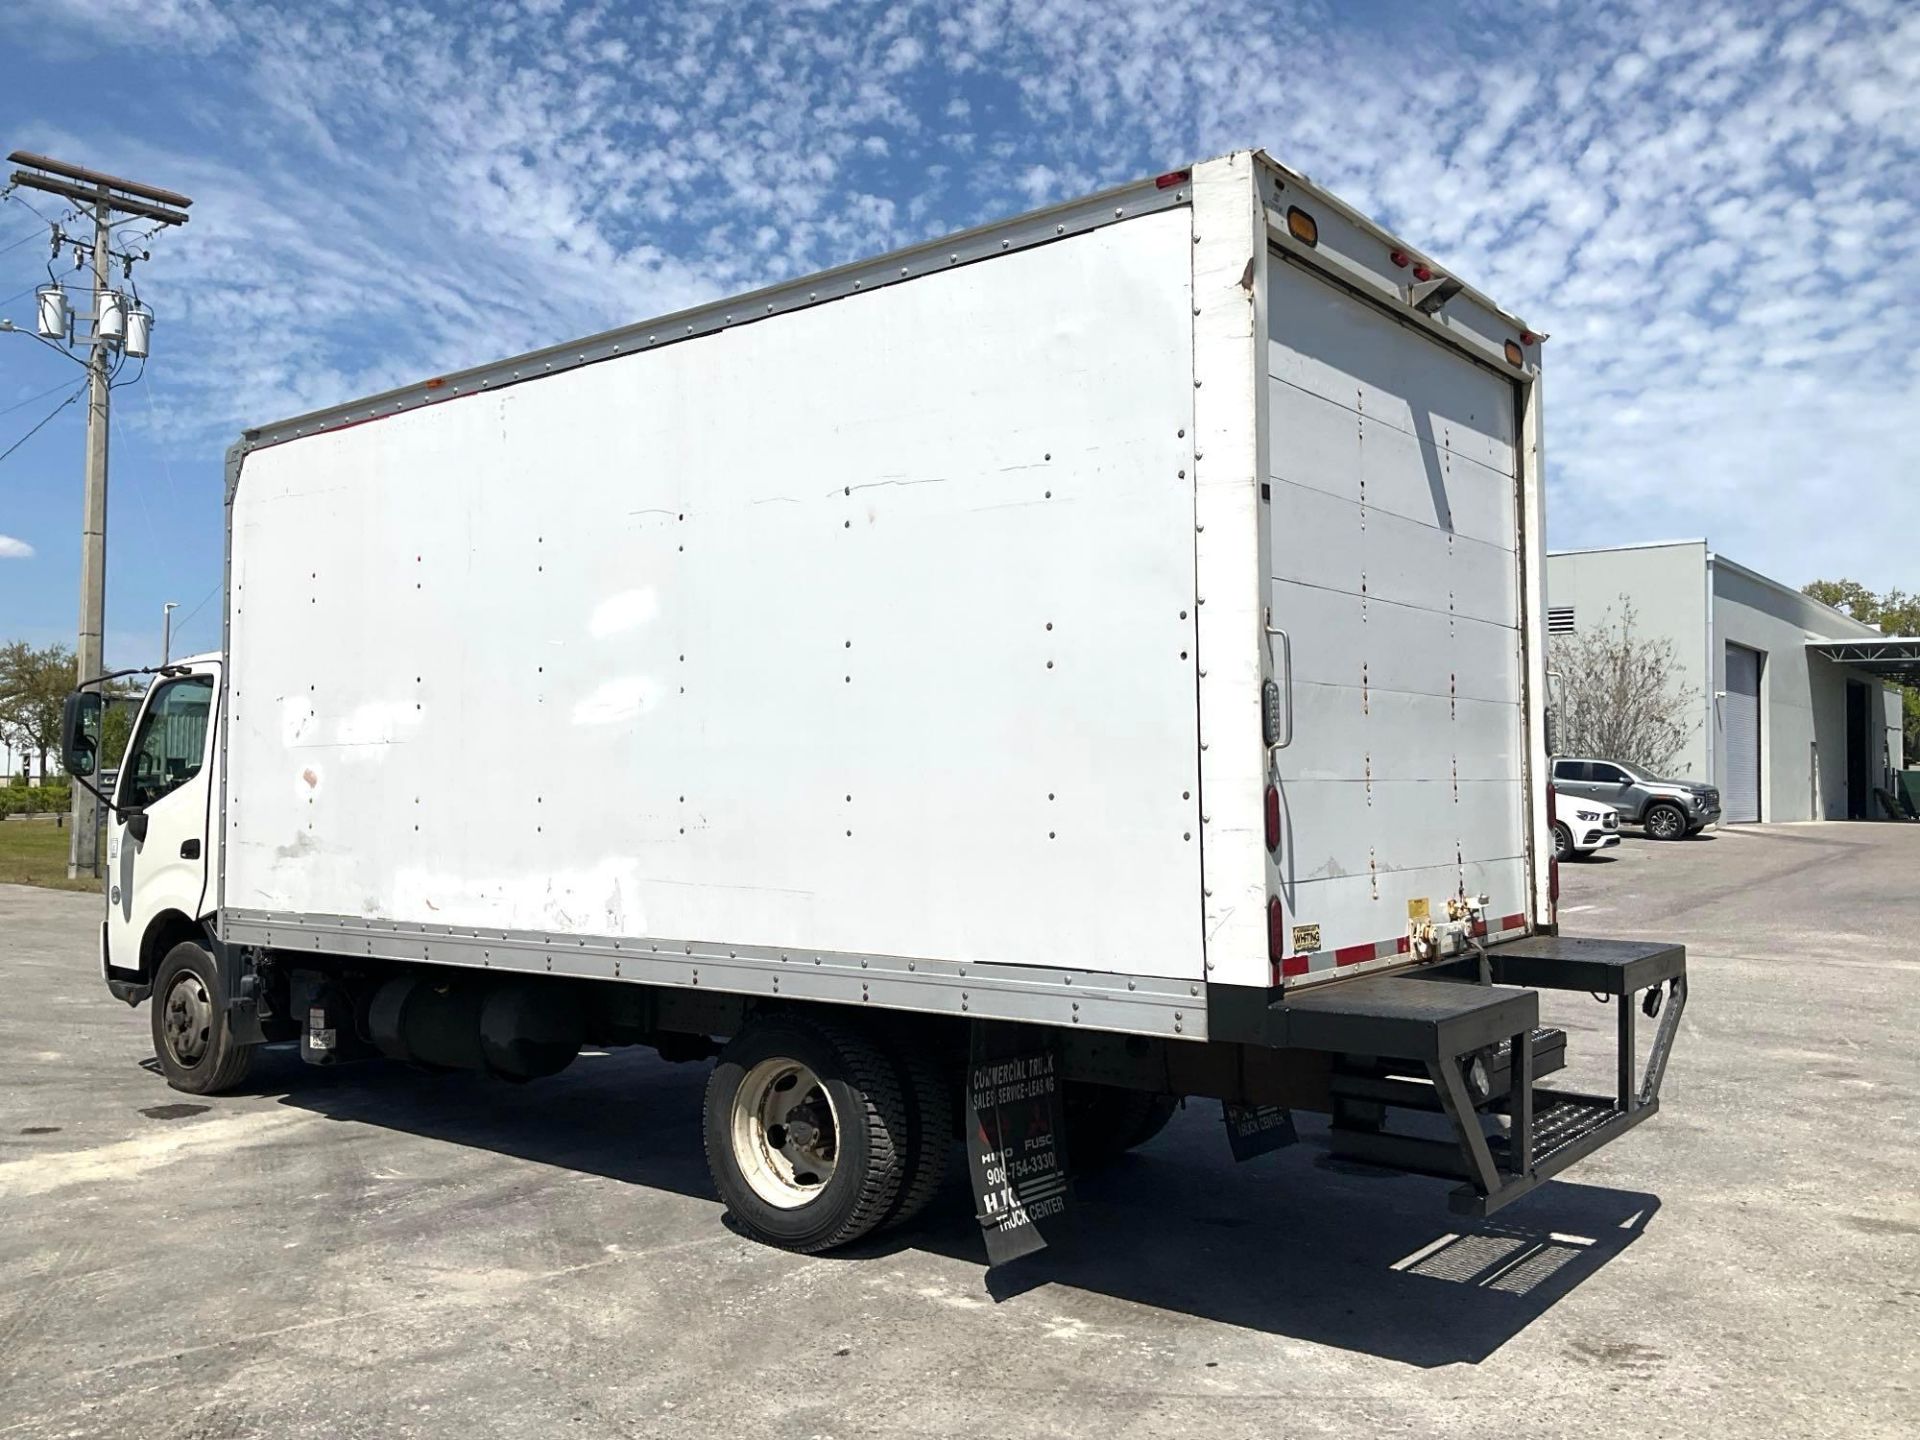 2017 HINO 740 BOX TRUCK , DIESEL , APPROX GVWR 17,950 LBS, BOX BODY APPROX 18FT, ETRACKS, BACK UP... - Image 4 of 29